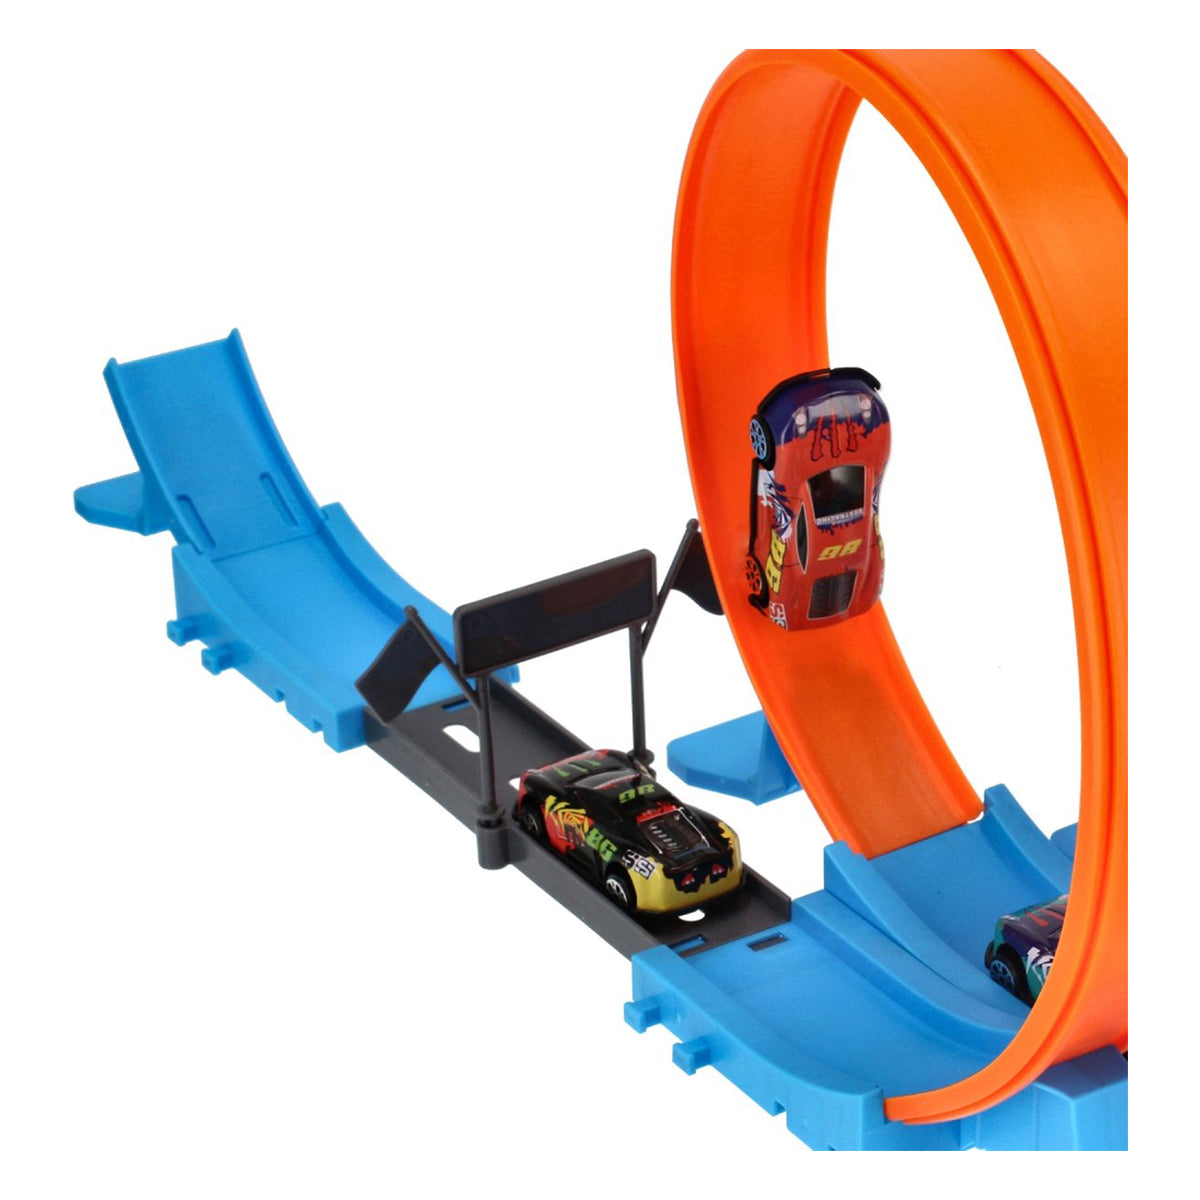 <tc>Ariko</tc> Double track race track - 40 parts - two loupes - two lounchers in 4 gears - 3 in 1 - 4 cars - with points system